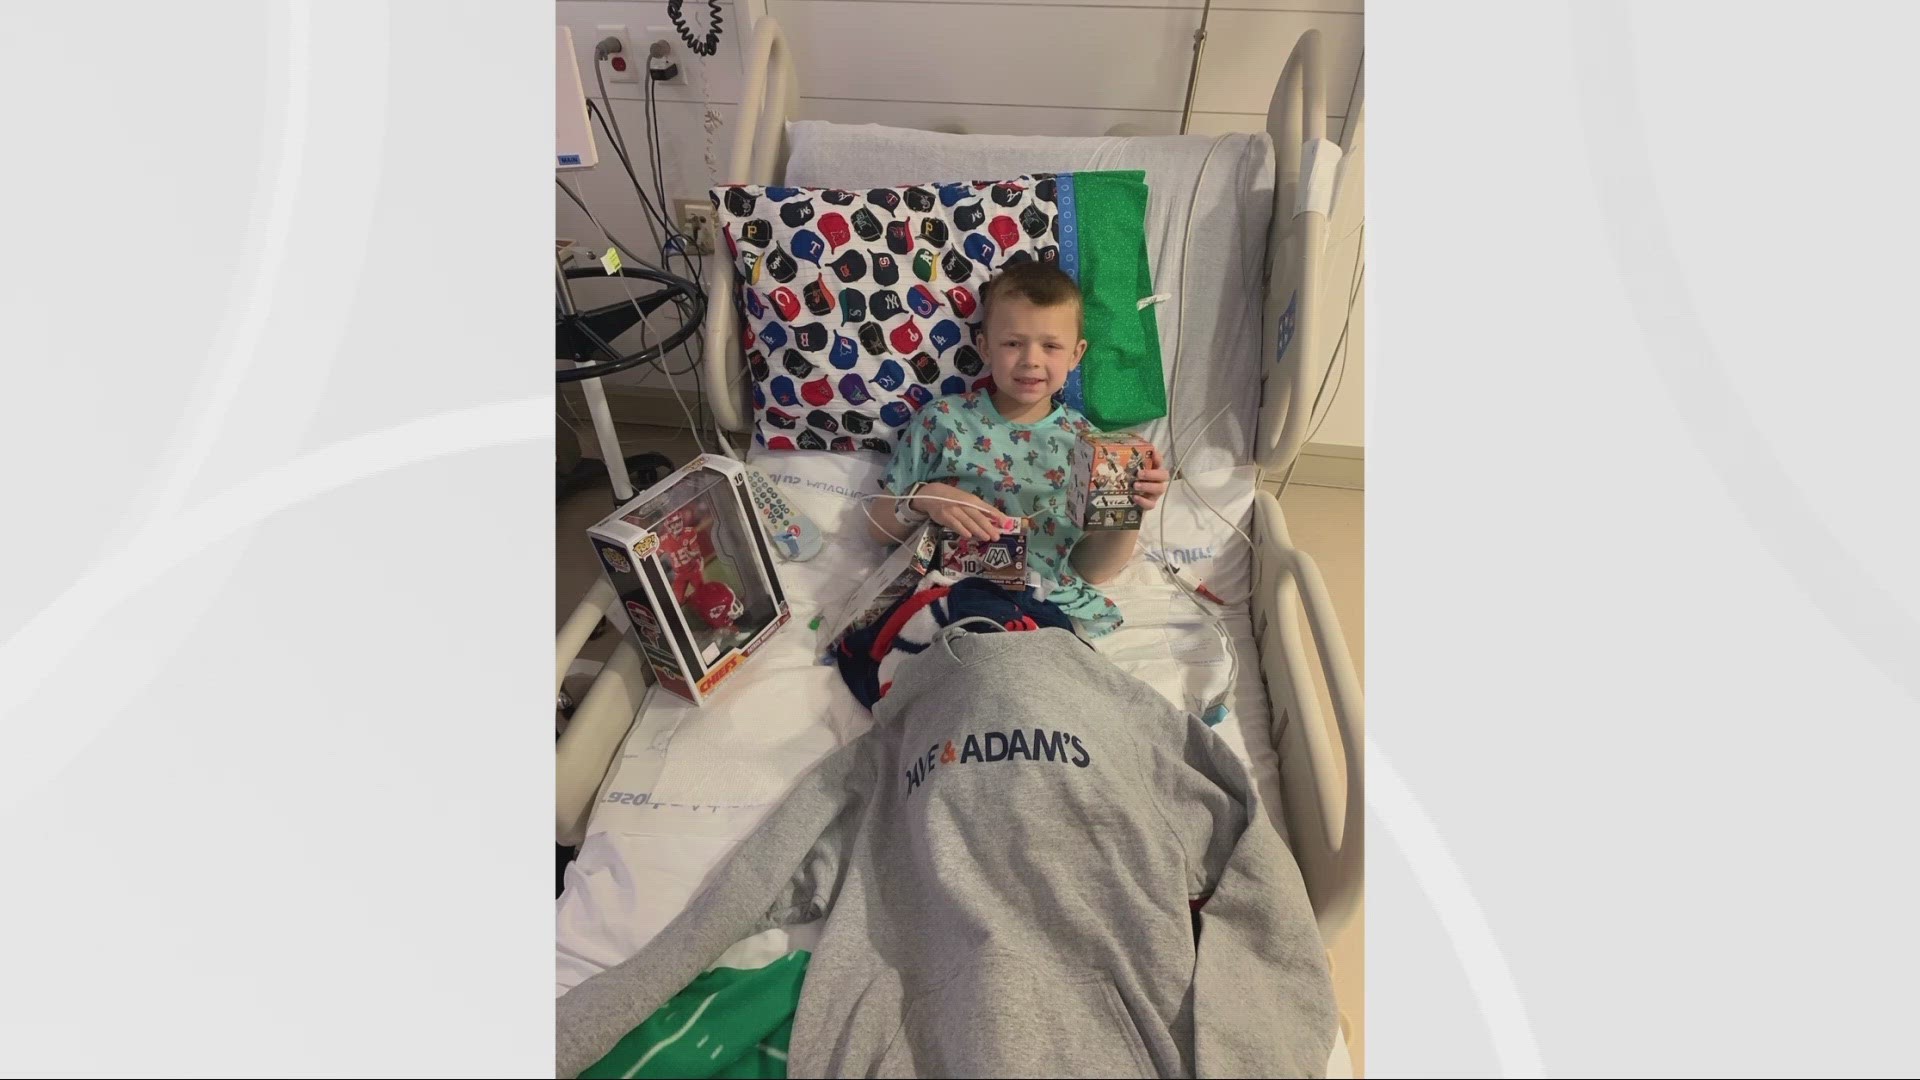 Kids in Rocky River are going above and beyond to help a 7-year-old boy battling cancer. Lindsay Buckingham tells us how the family is doing.